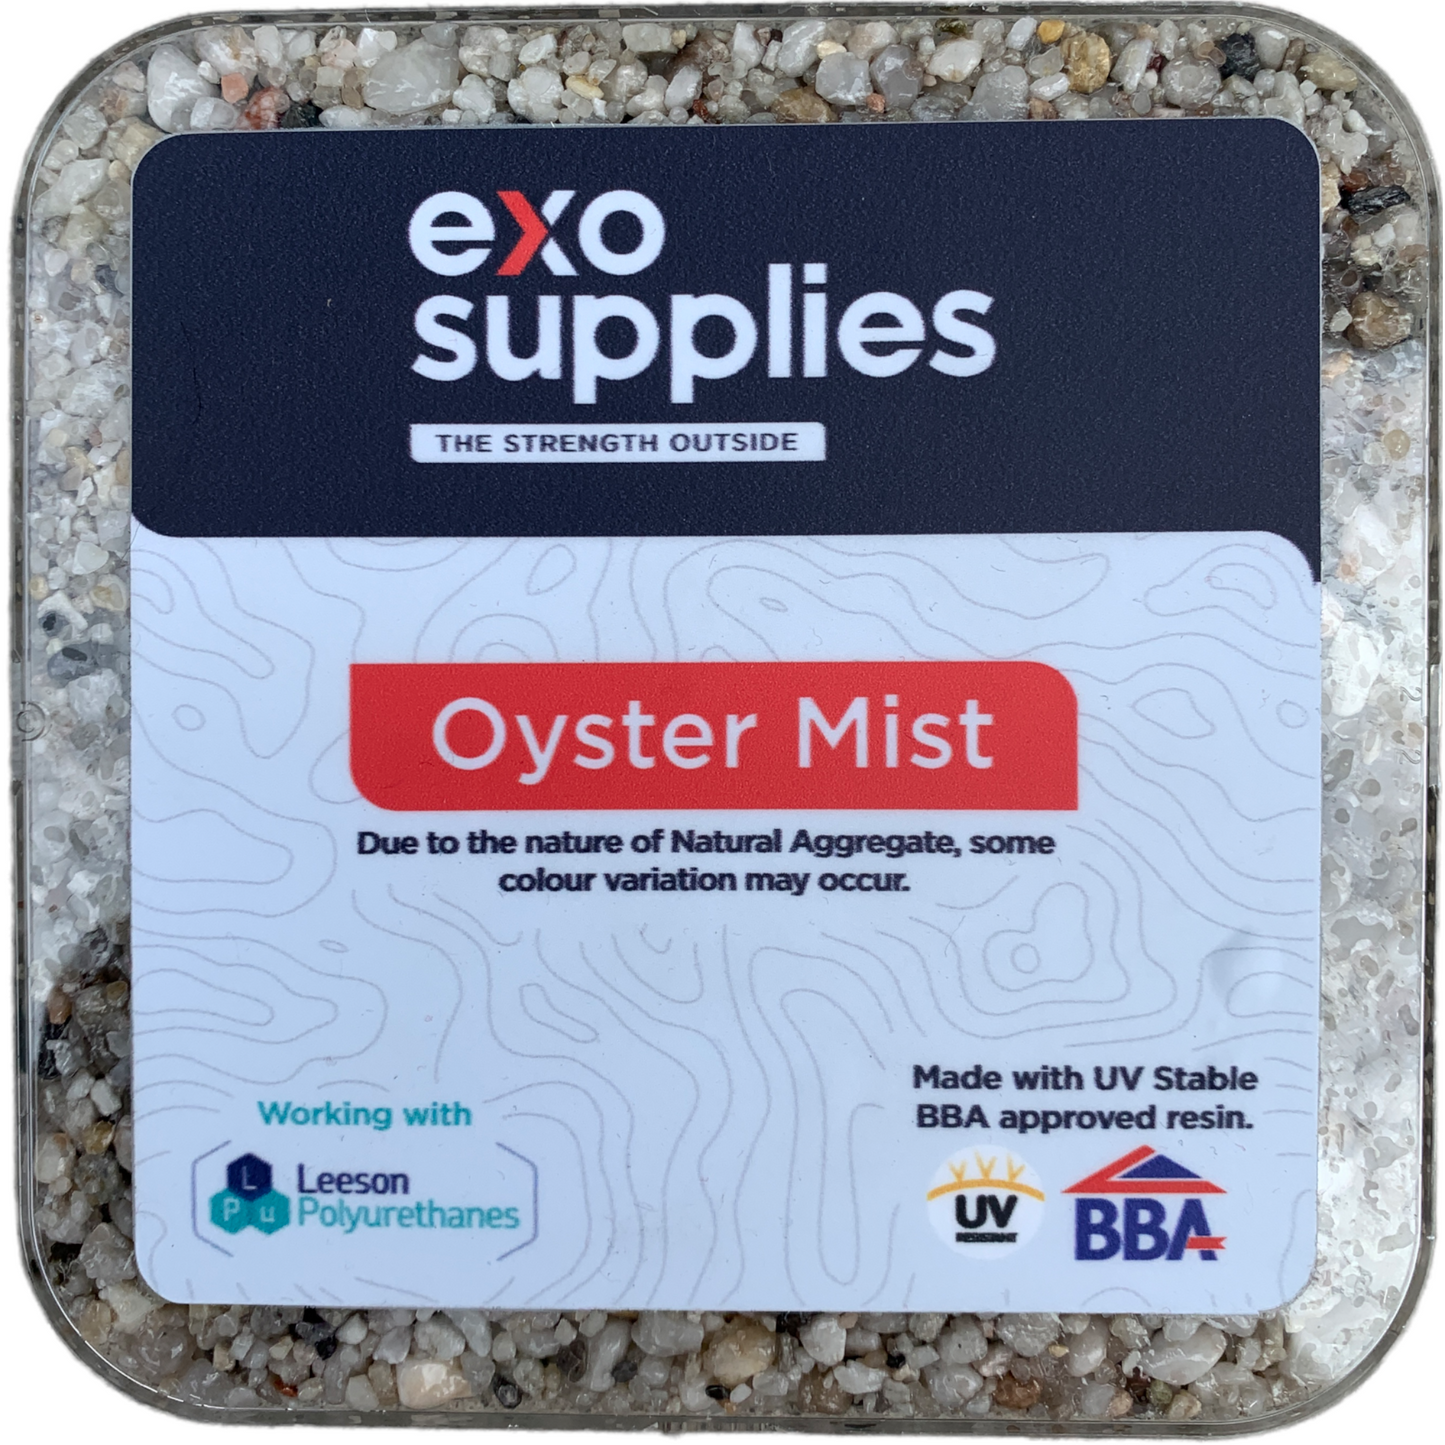 Exo Oyster Mist with BBA 7.5kb UV stable Resin